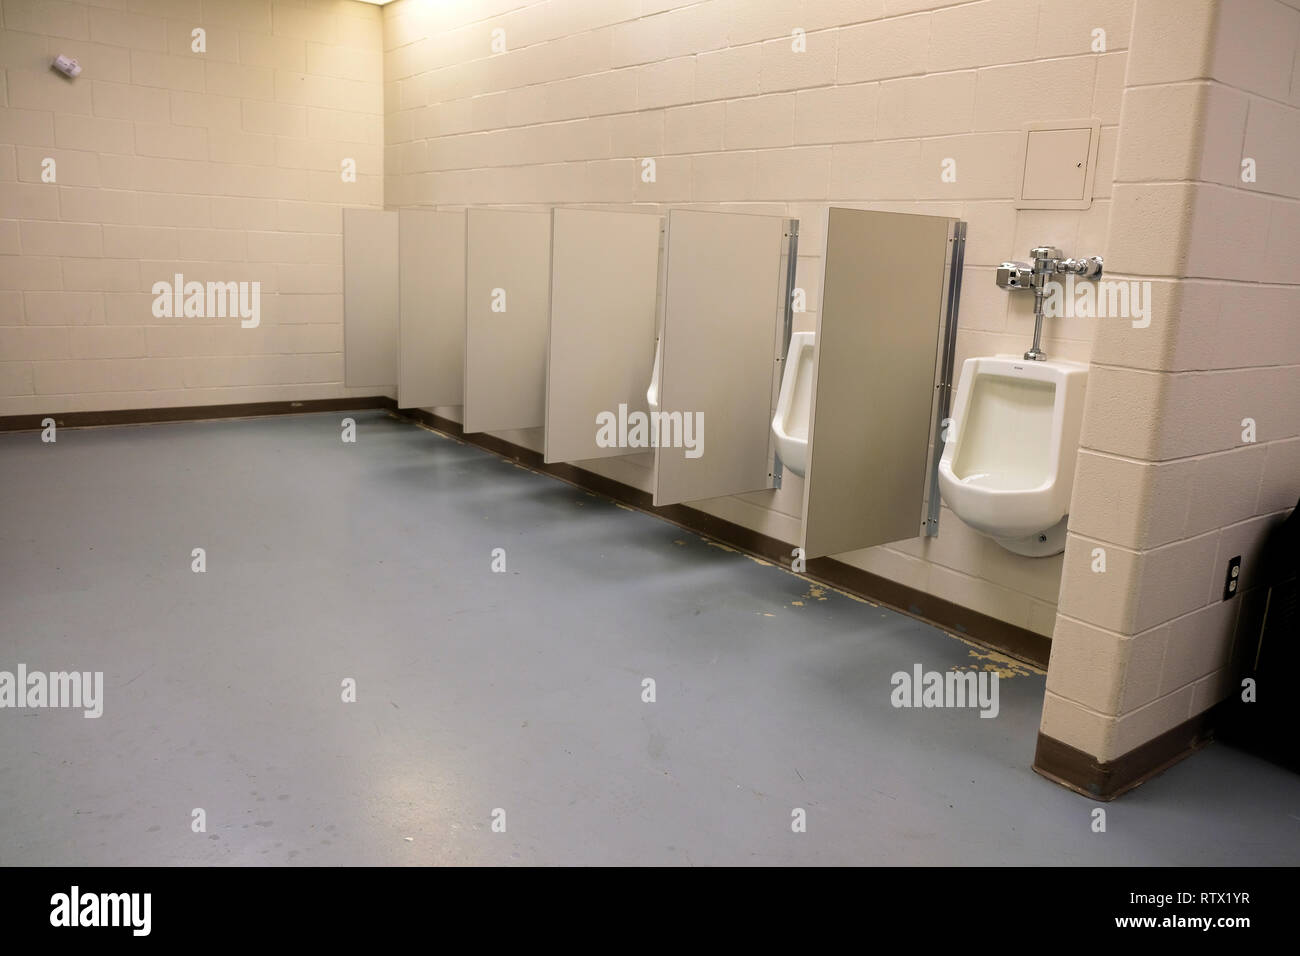 https://c8.alamy.com/comp/RTX1YR/empty-row-of-urinals-in-a-mens-public-restroom-only-one-urinal-completely-visible-bathroom-urinals-with-dividers-between-them-RTX1YR.jpg